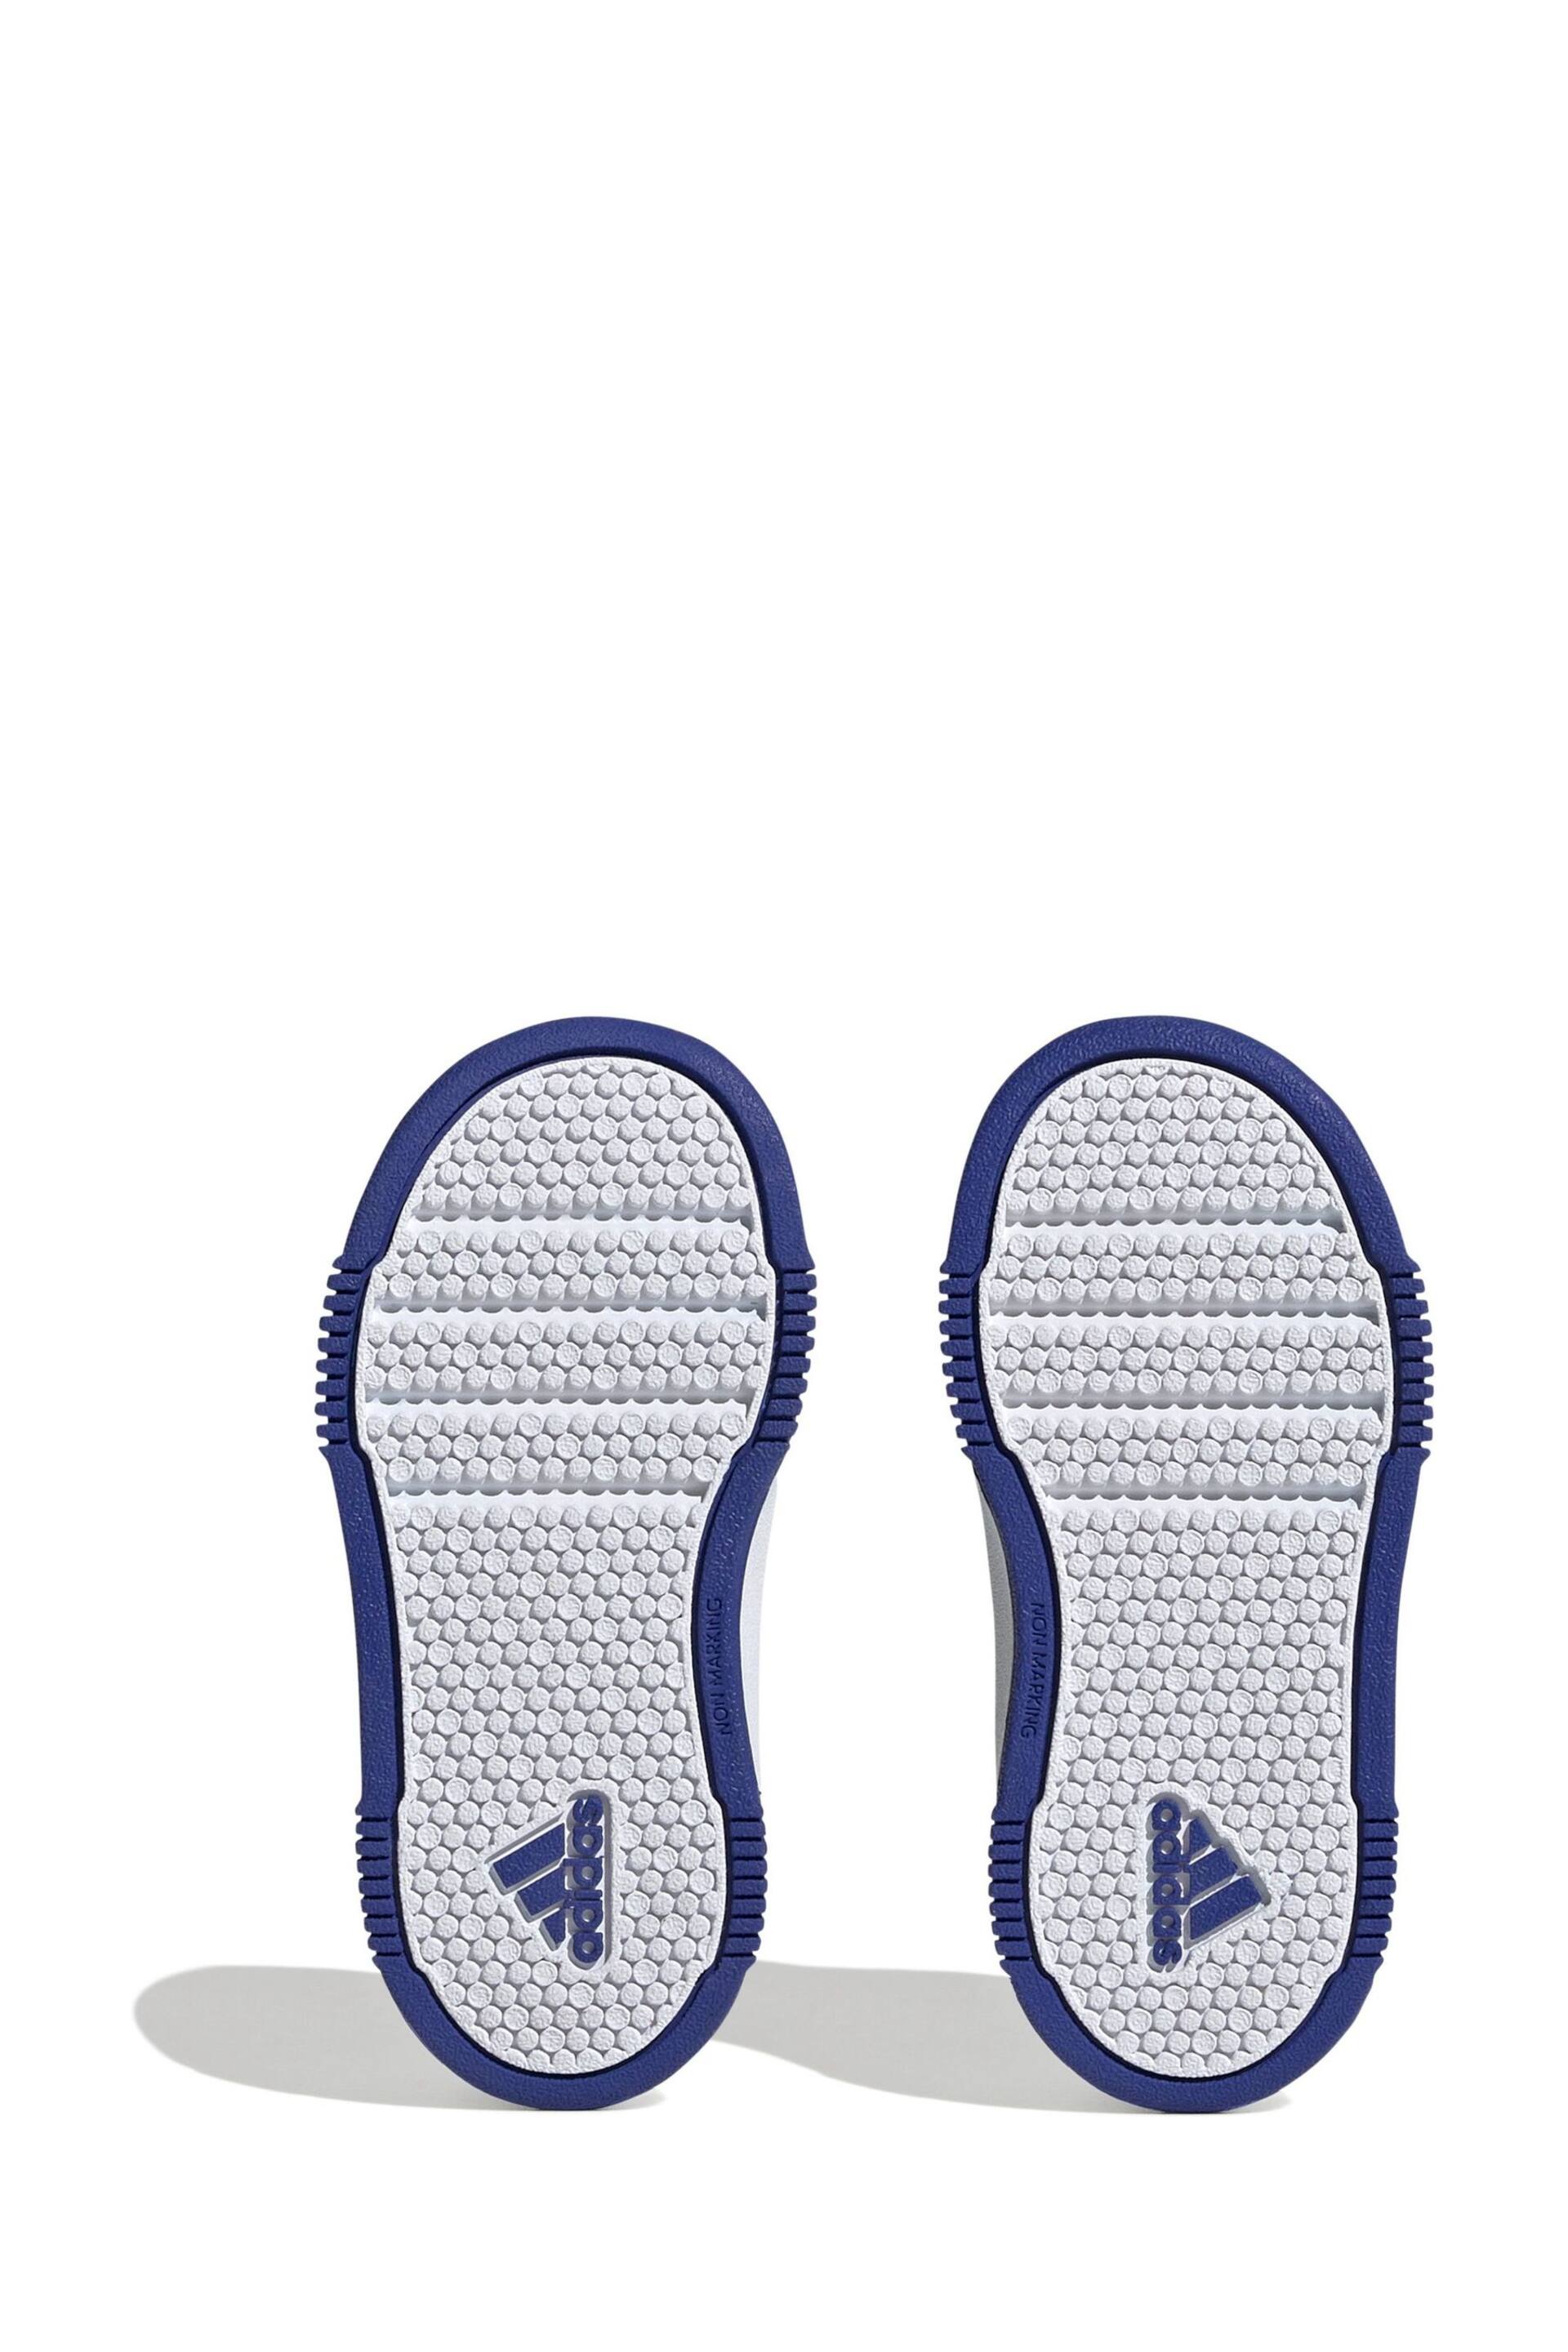 adidas White/Blue Tensaur Hook and Loop Shoes - Image 6 of 9